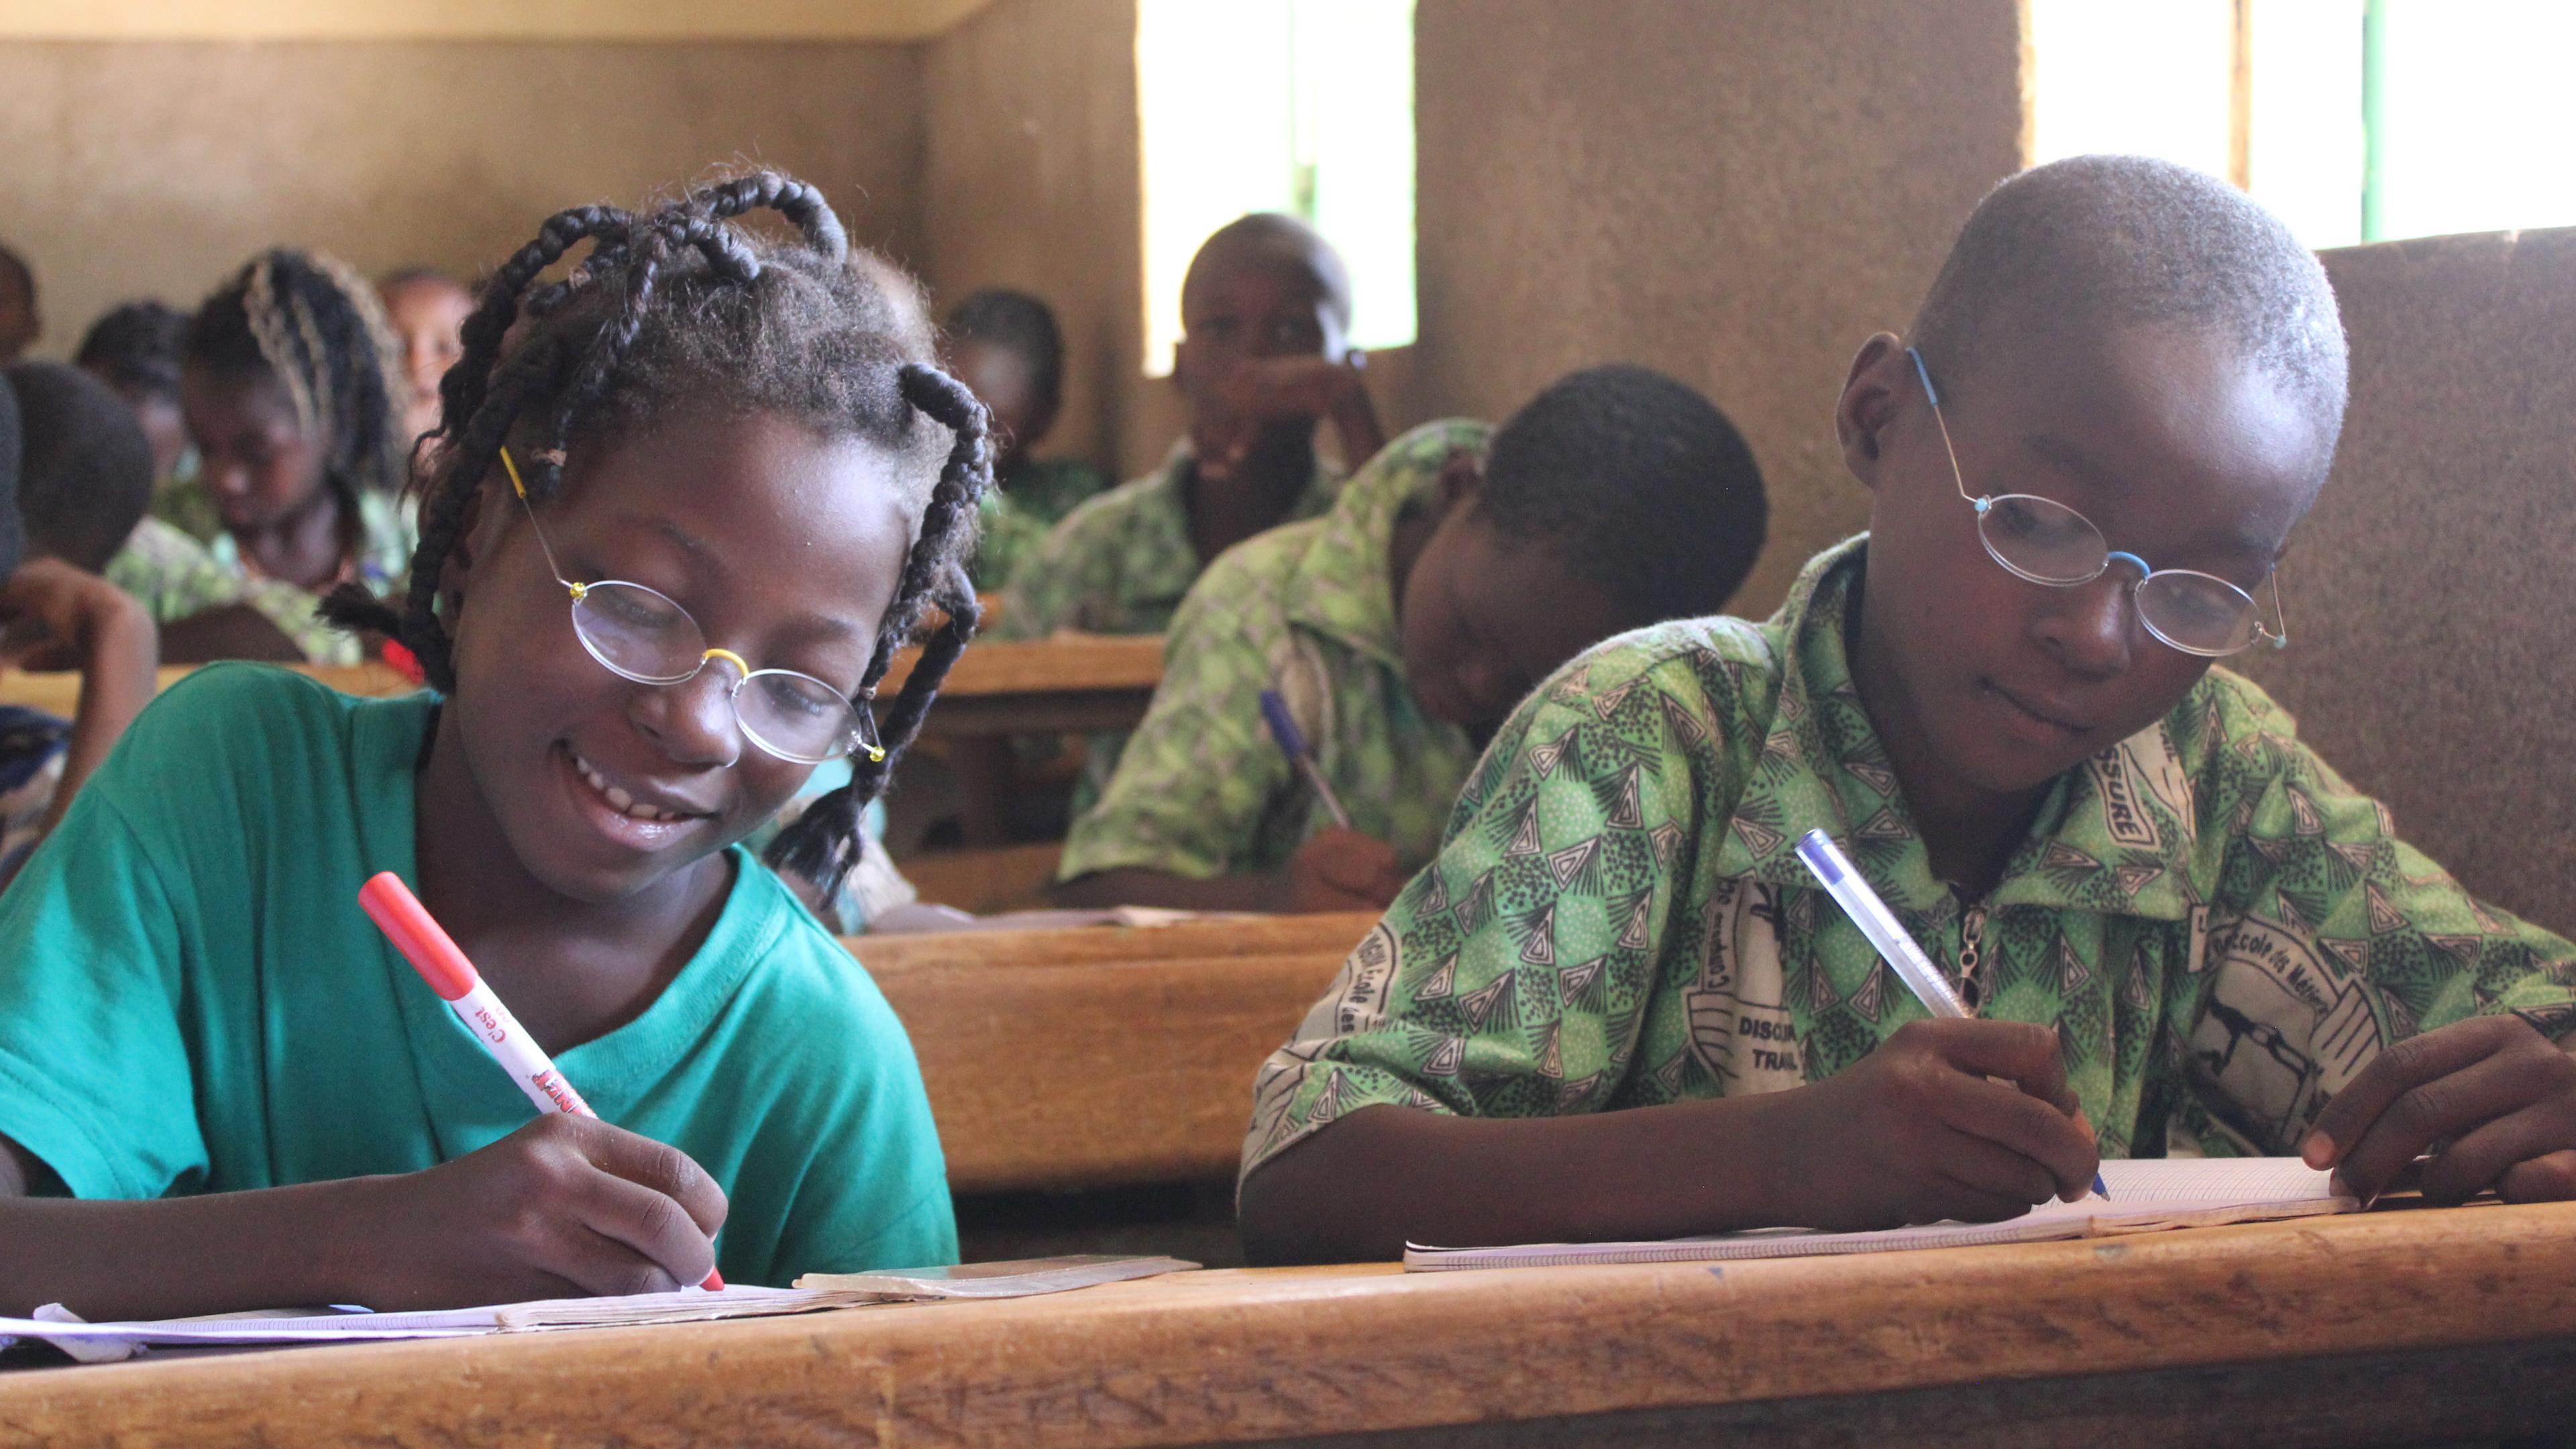 Pupils with OneDollarGlasses writing in the classroom